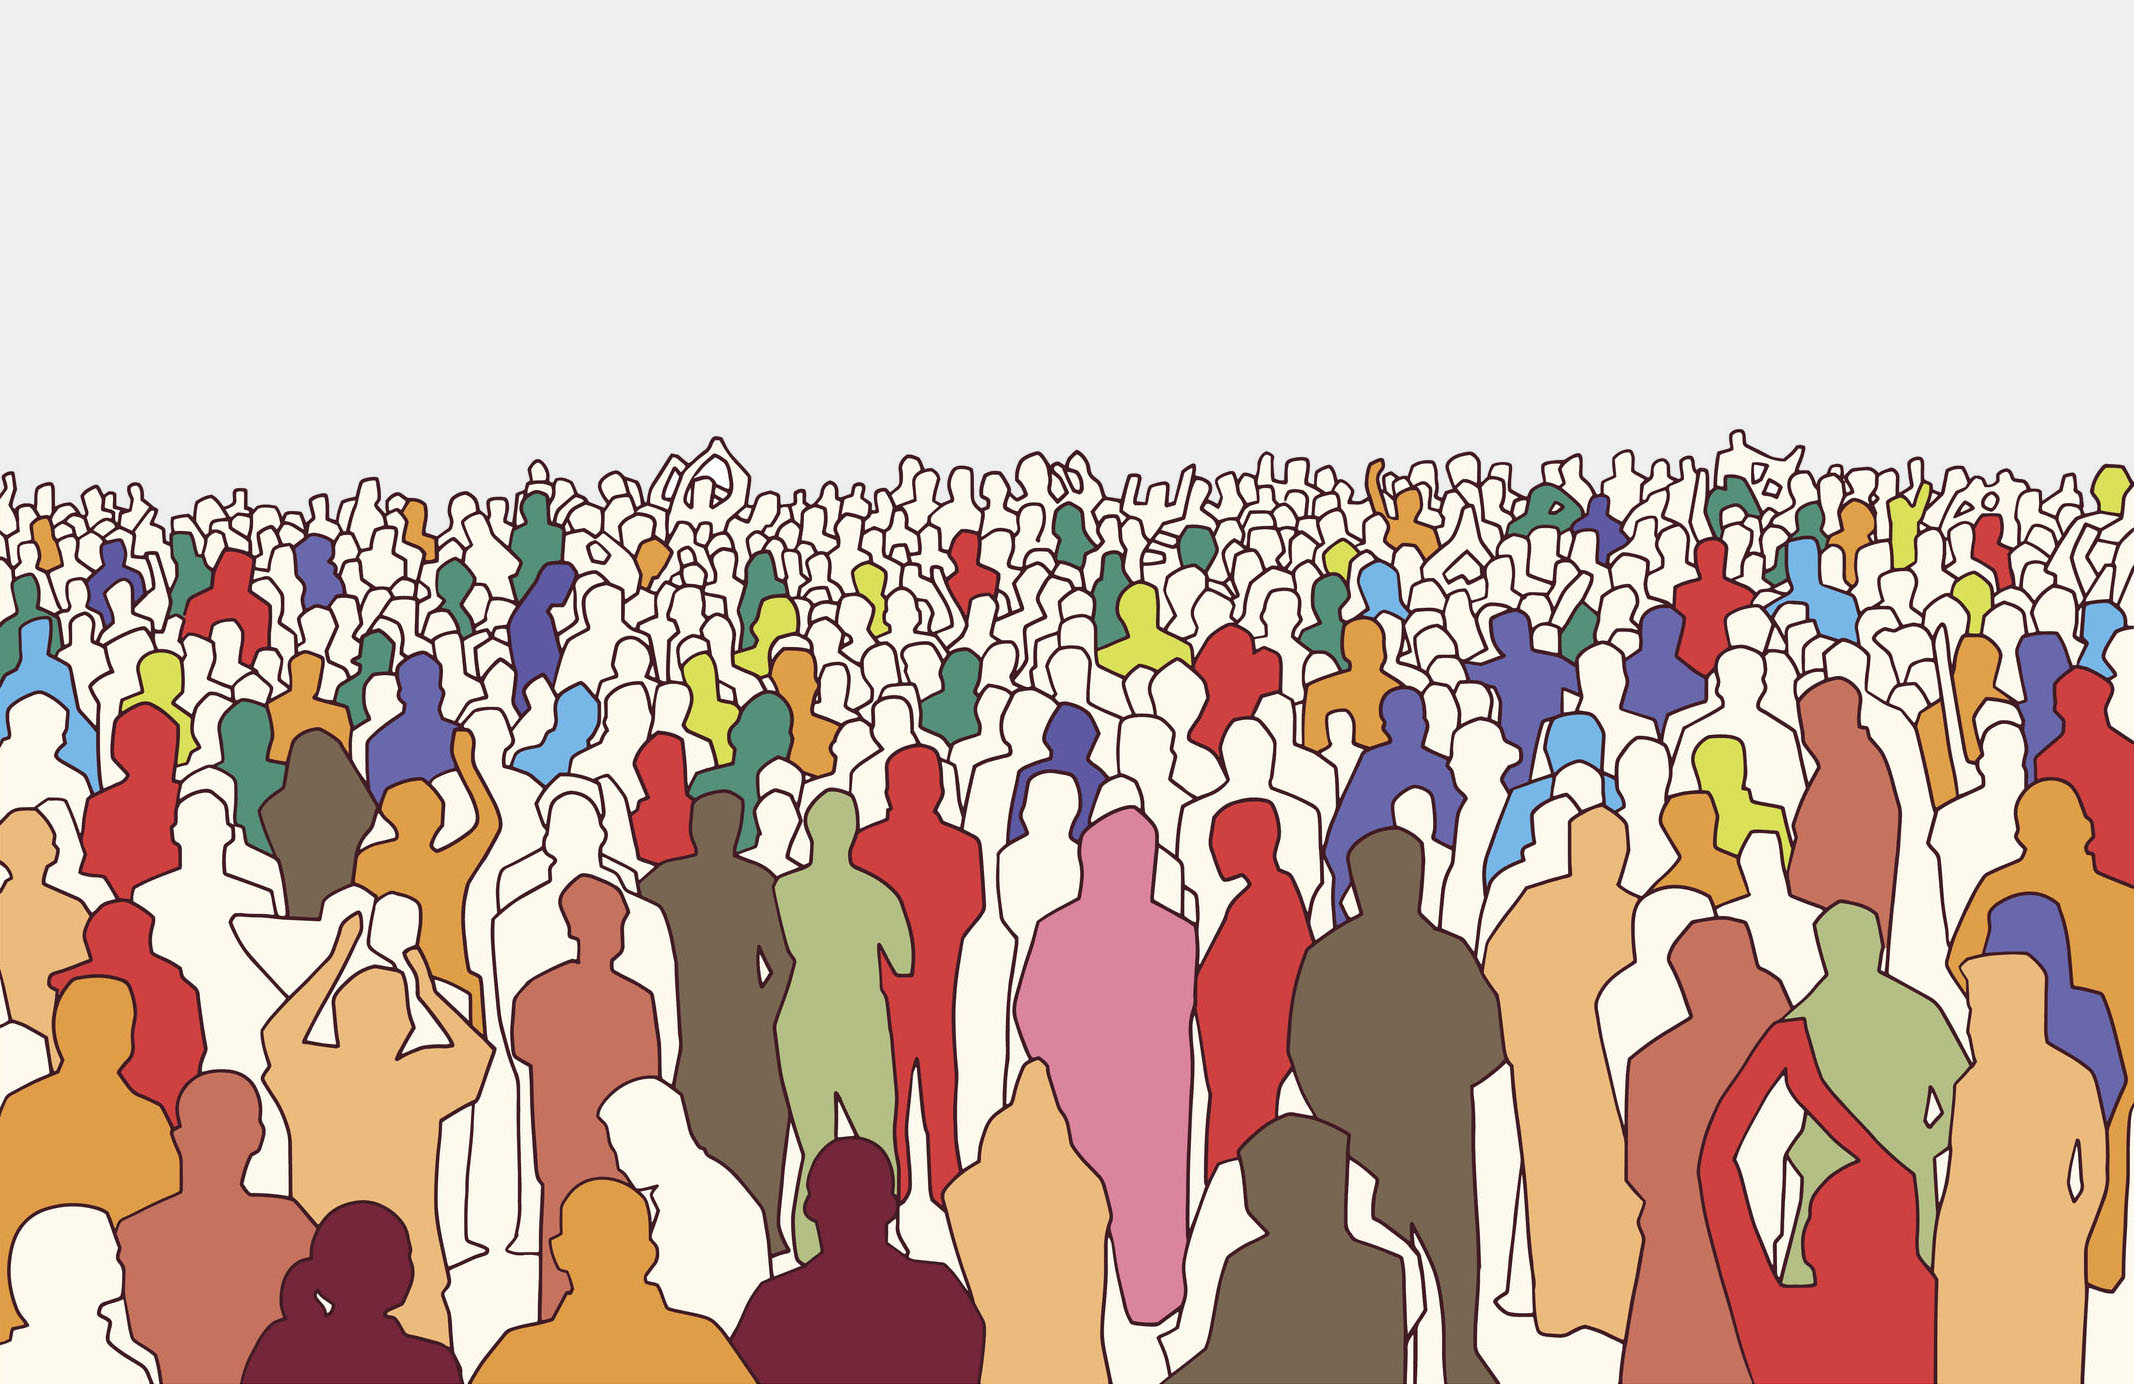 Illustration of people in a crowd